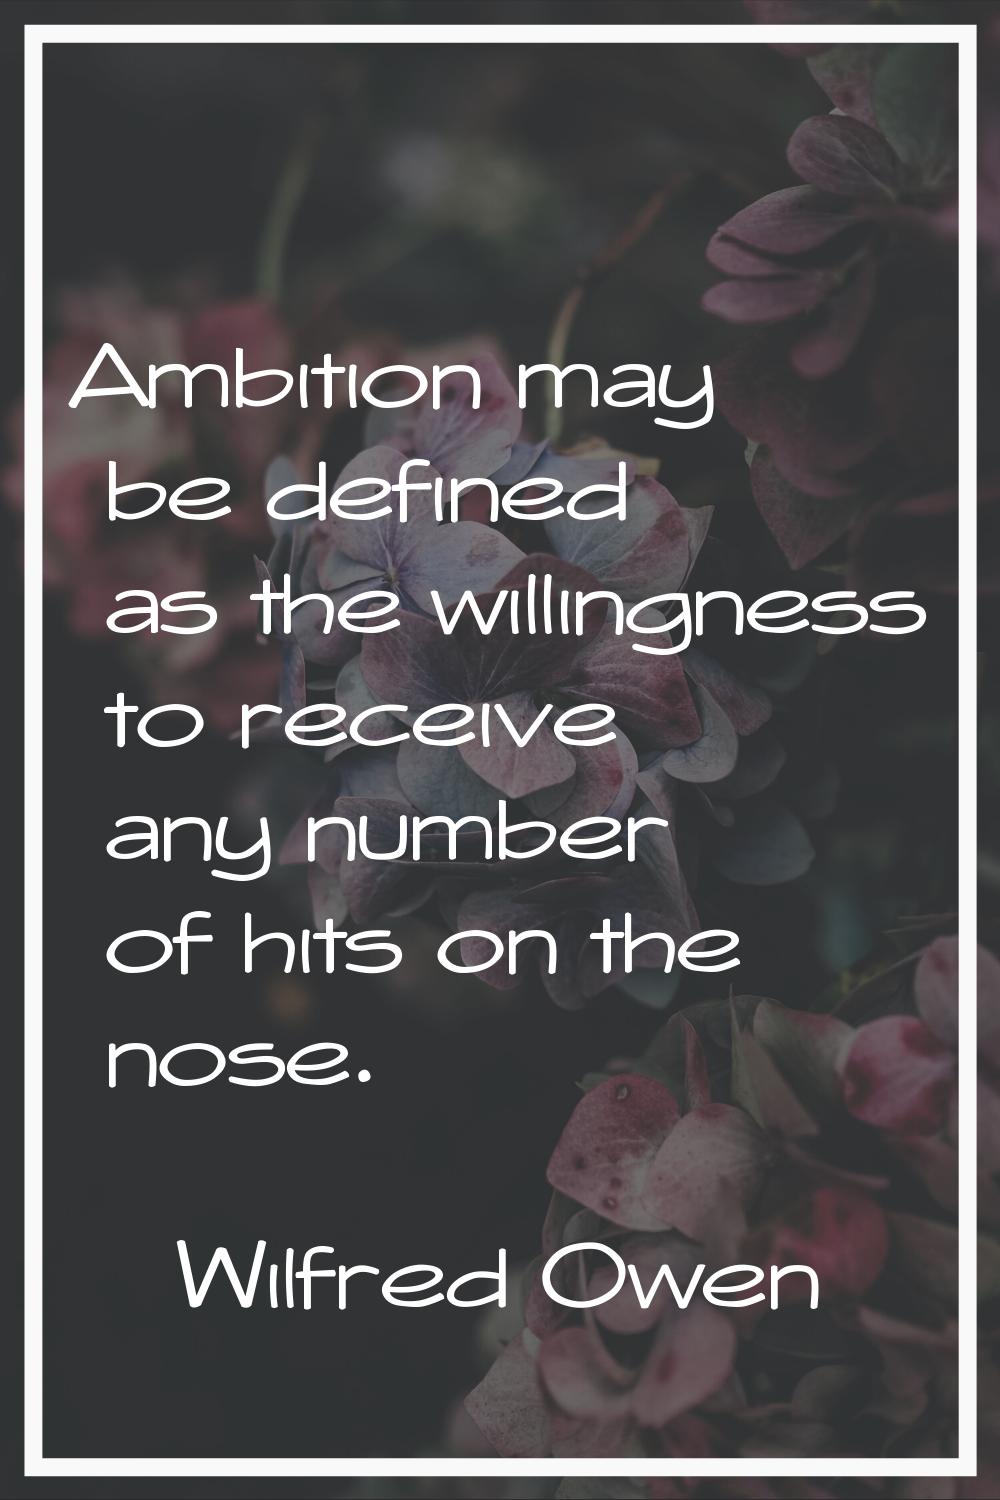 Ambition may be defined as the willingness to receive any number of hits on the nose.